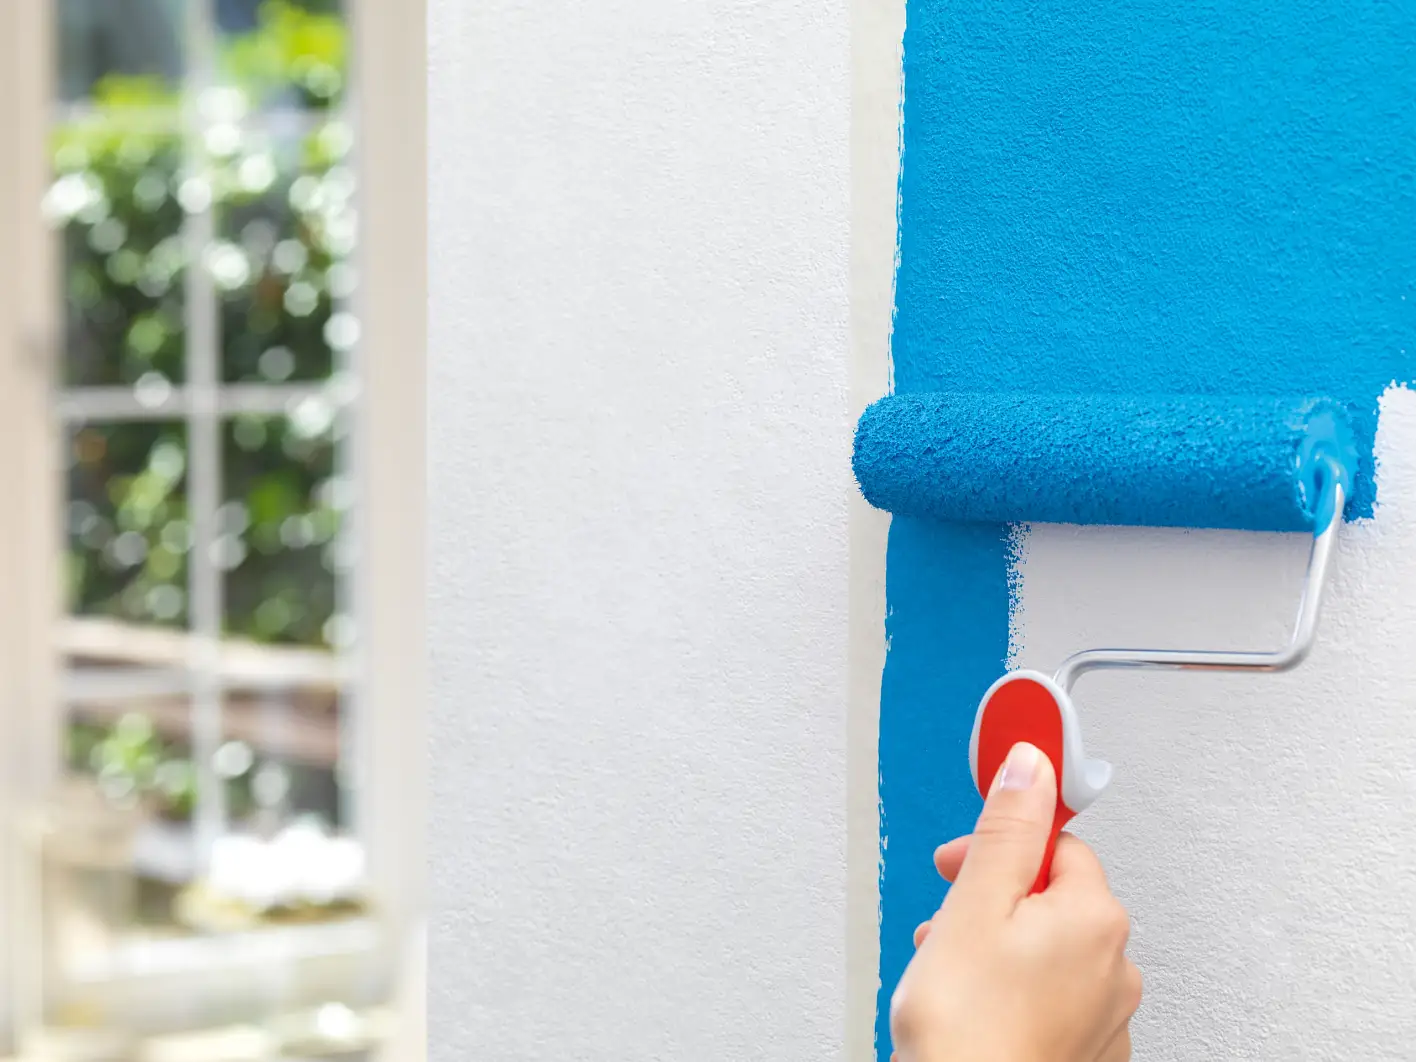 4. Then apply the paint evenly on the wall surface with the roller.